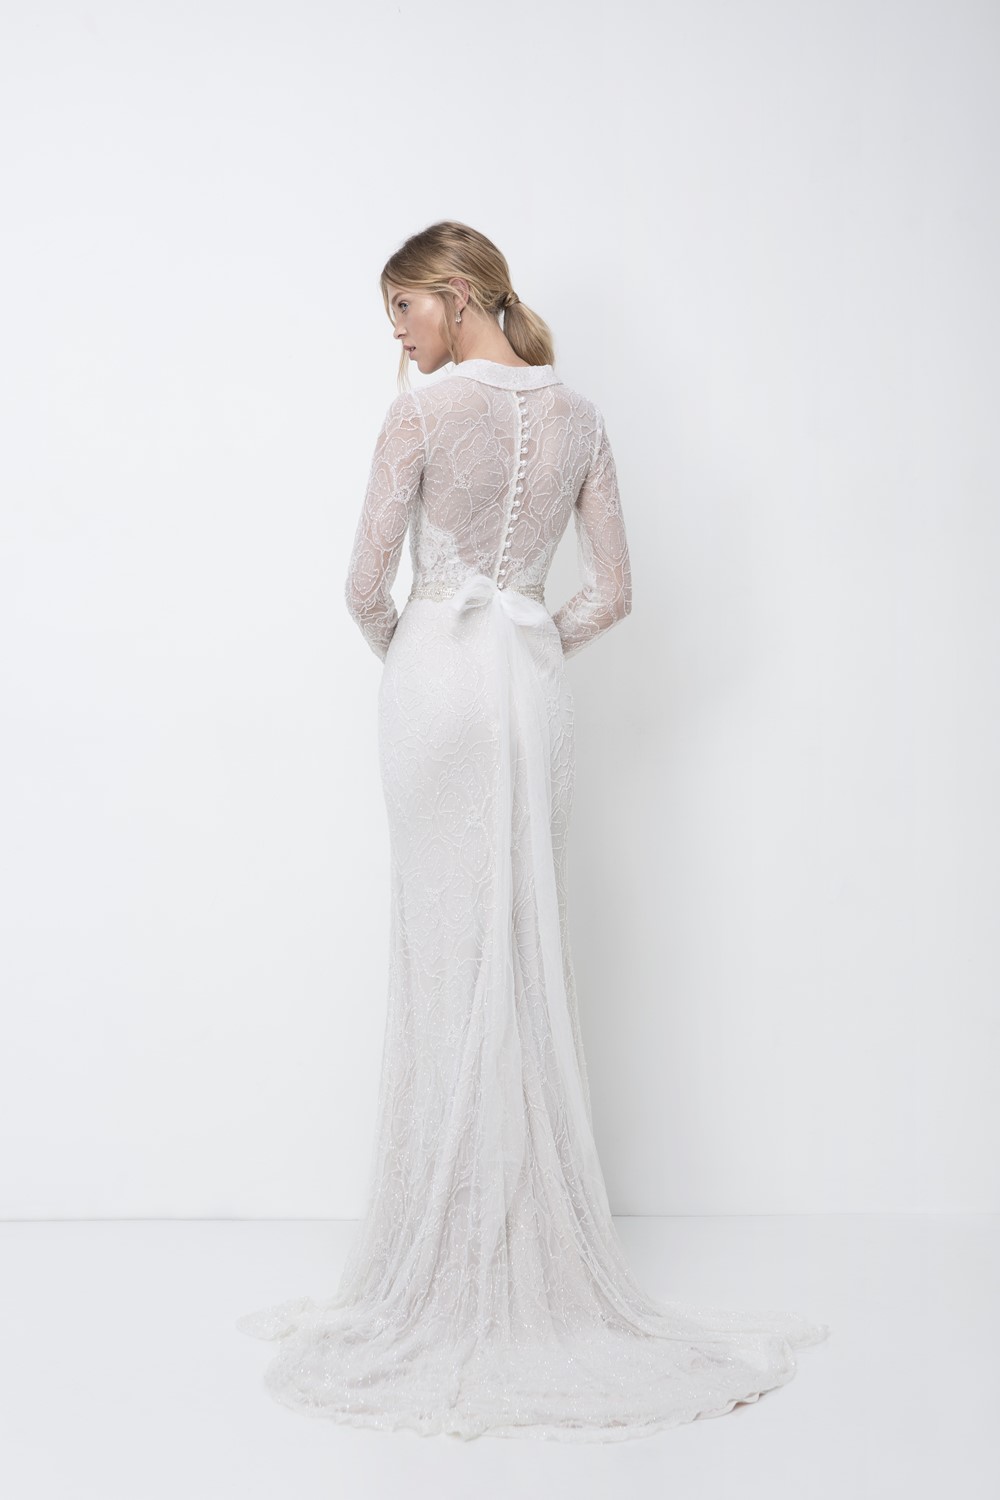 Leonora Wedding Dress from Lihi Hod's 2018 Bridal Collection